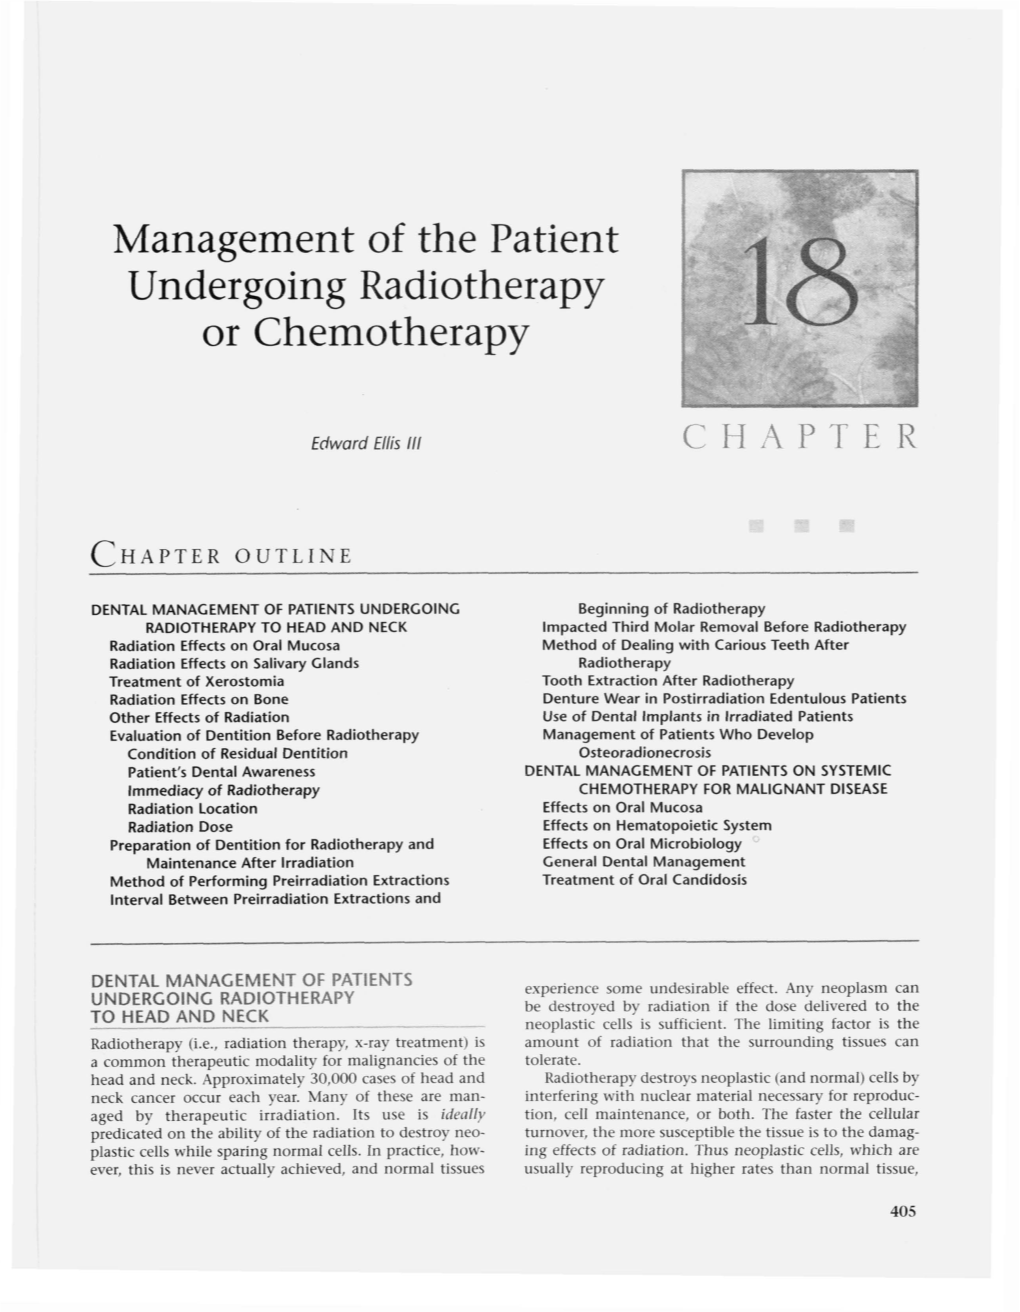 Management of the Patient Undergoing Radiotherapy Or Chemotherapy